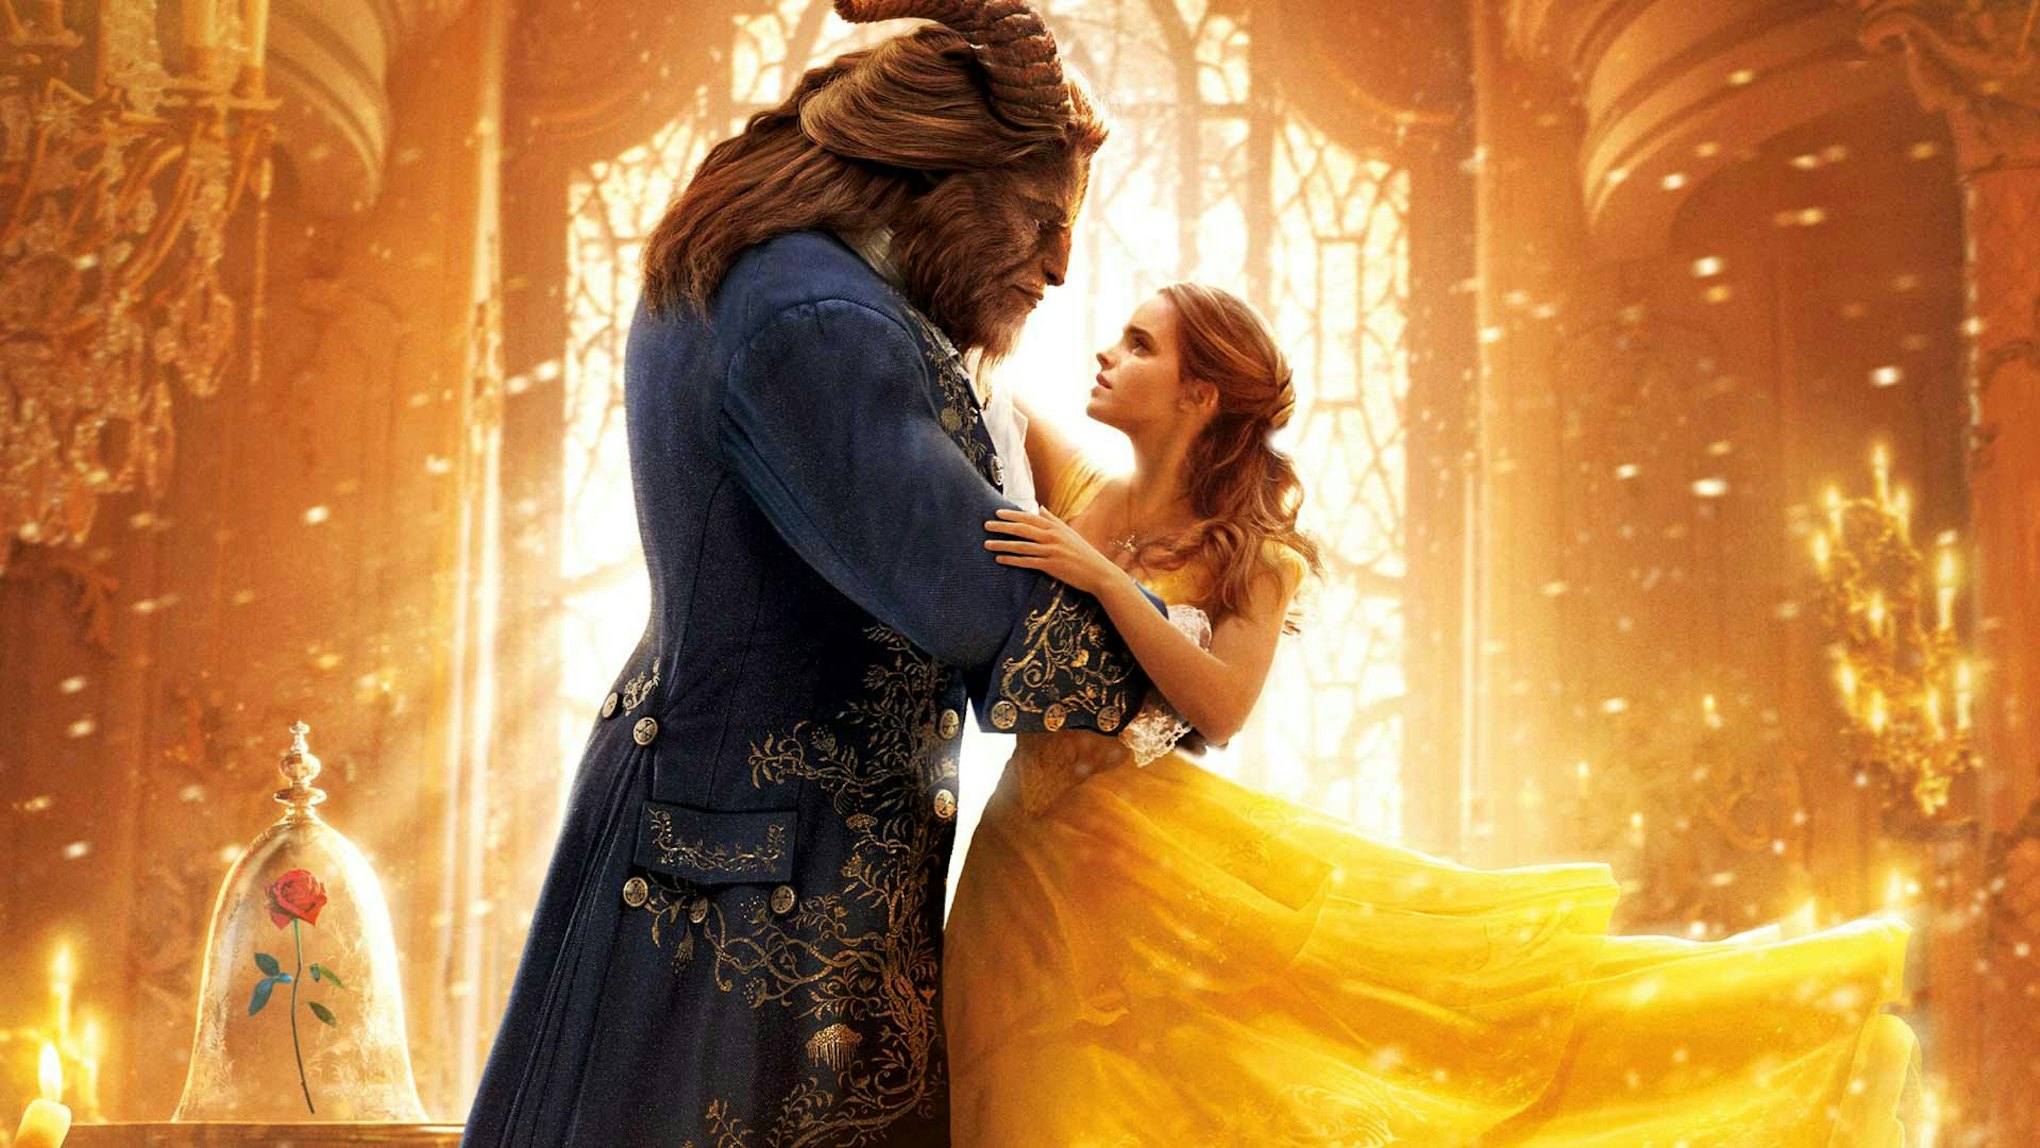 Poster shot of Beauty and the beast featuring Emma Watson and The Beast